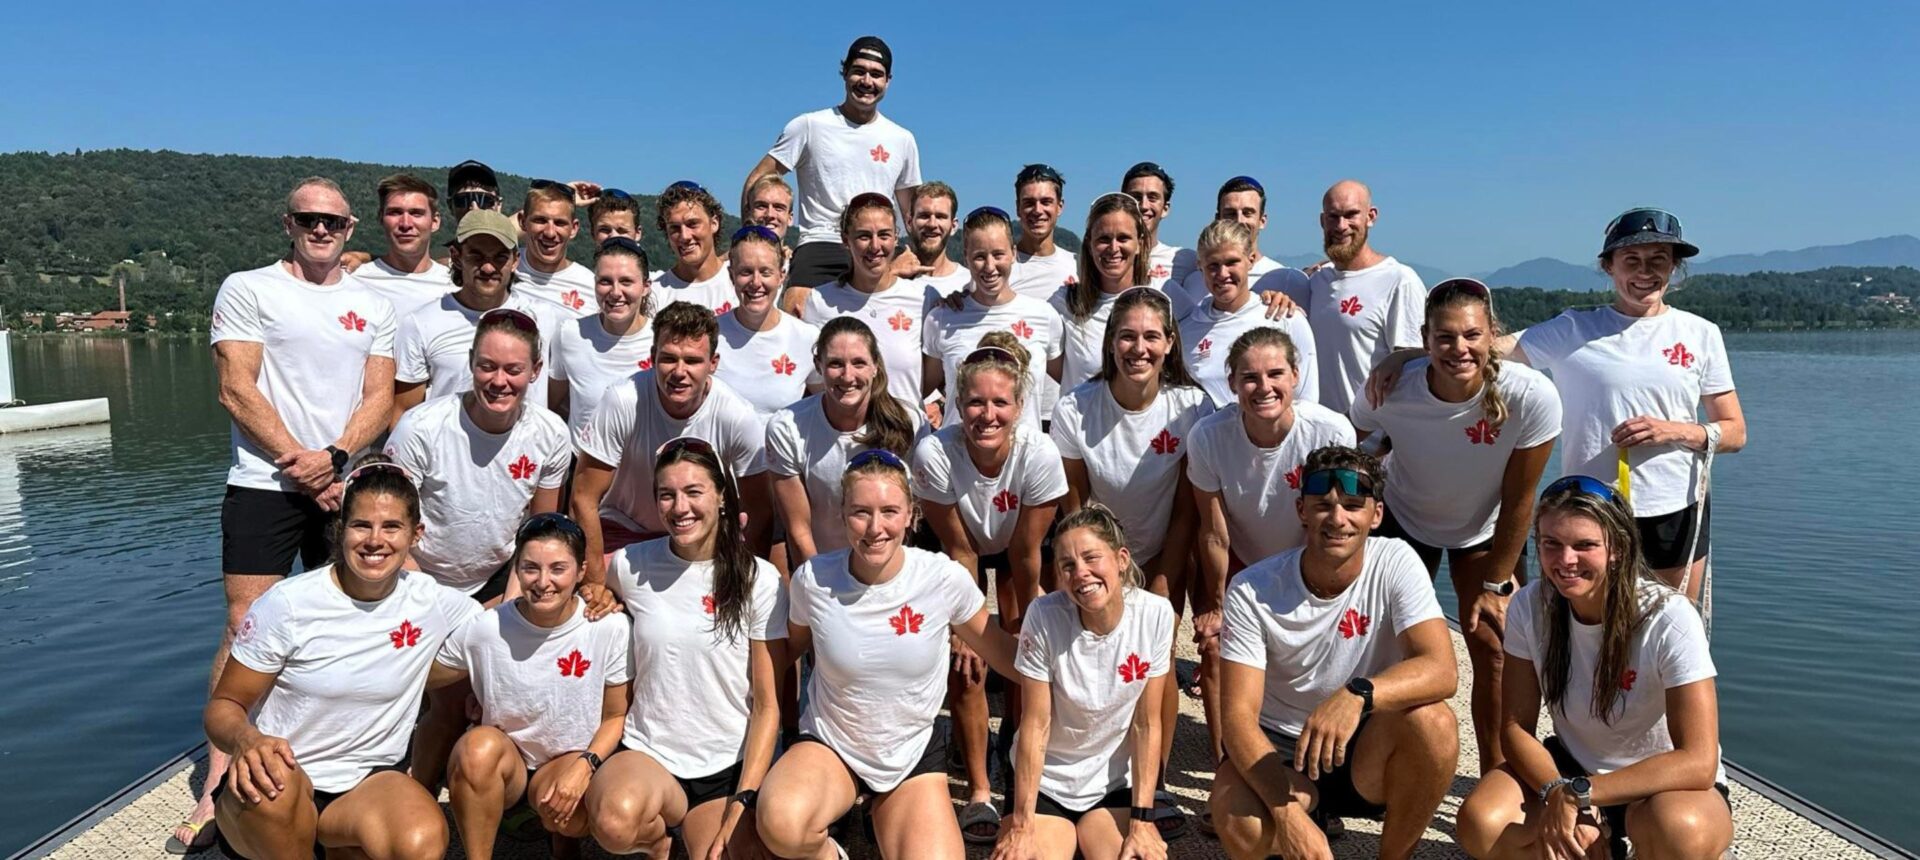 Canadian Rowing Team Announced for 2023 World Rowing Championships